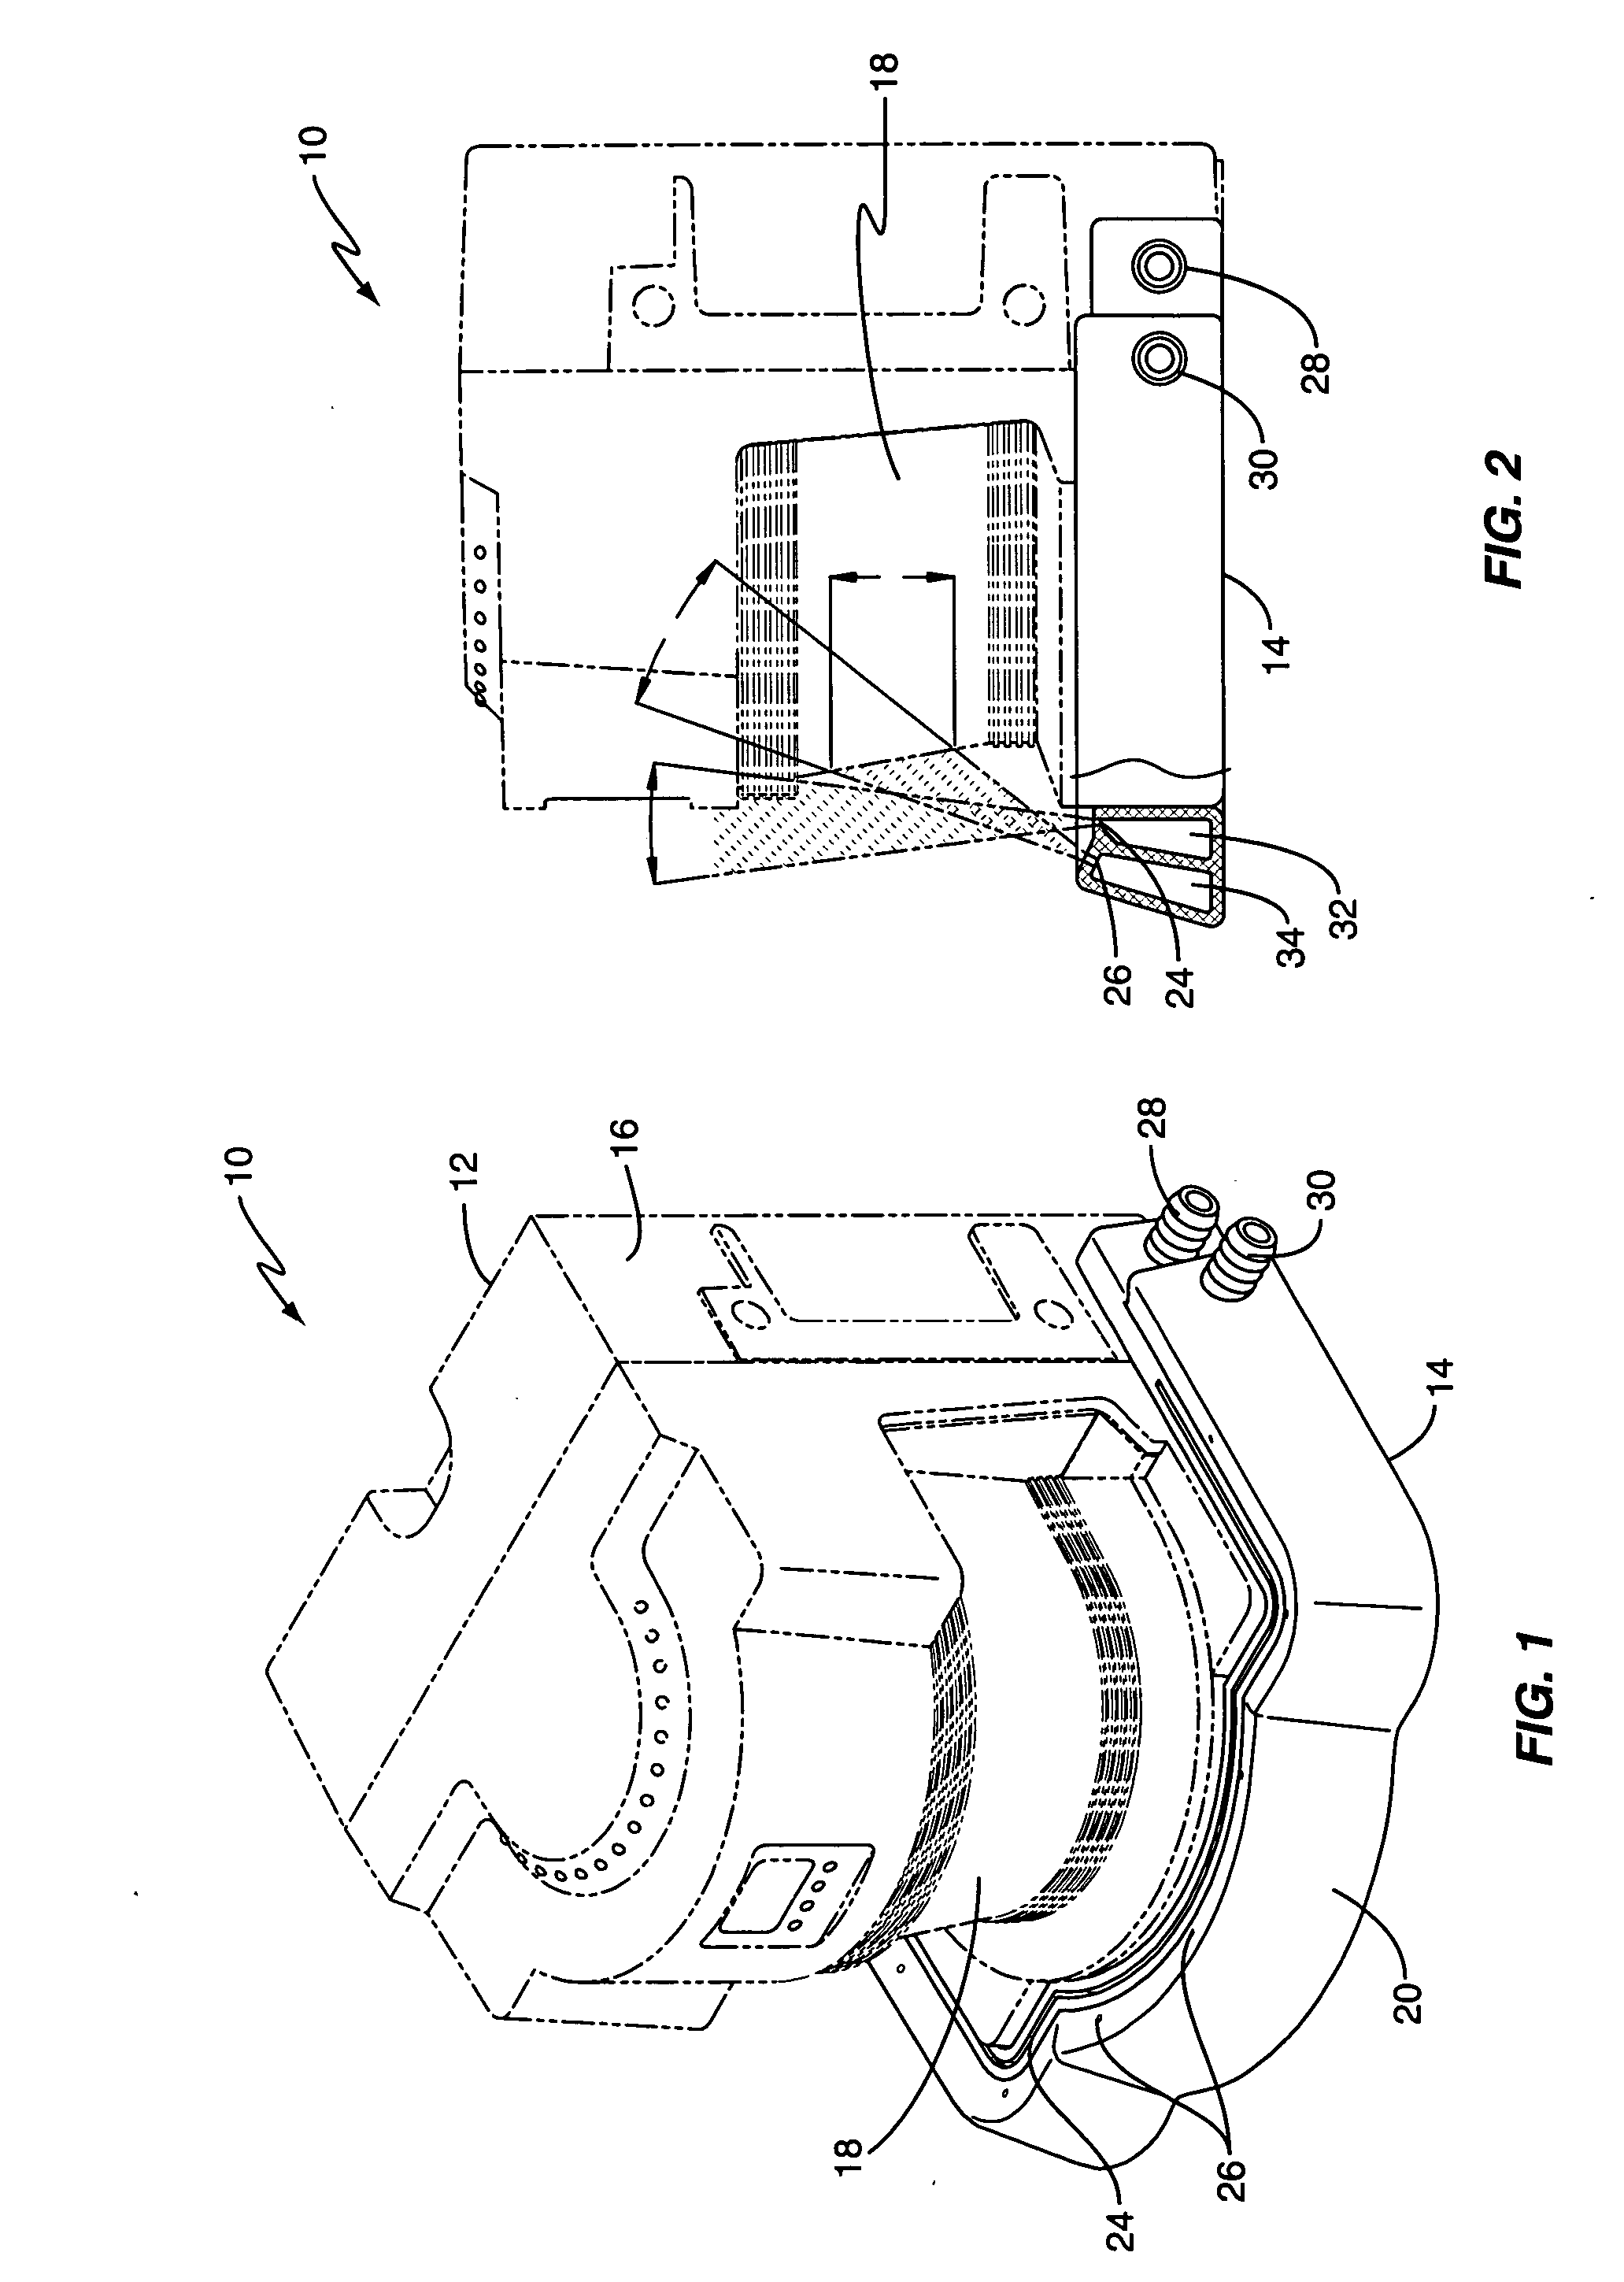 Apparatus and method for laser scanner cleaning and protection